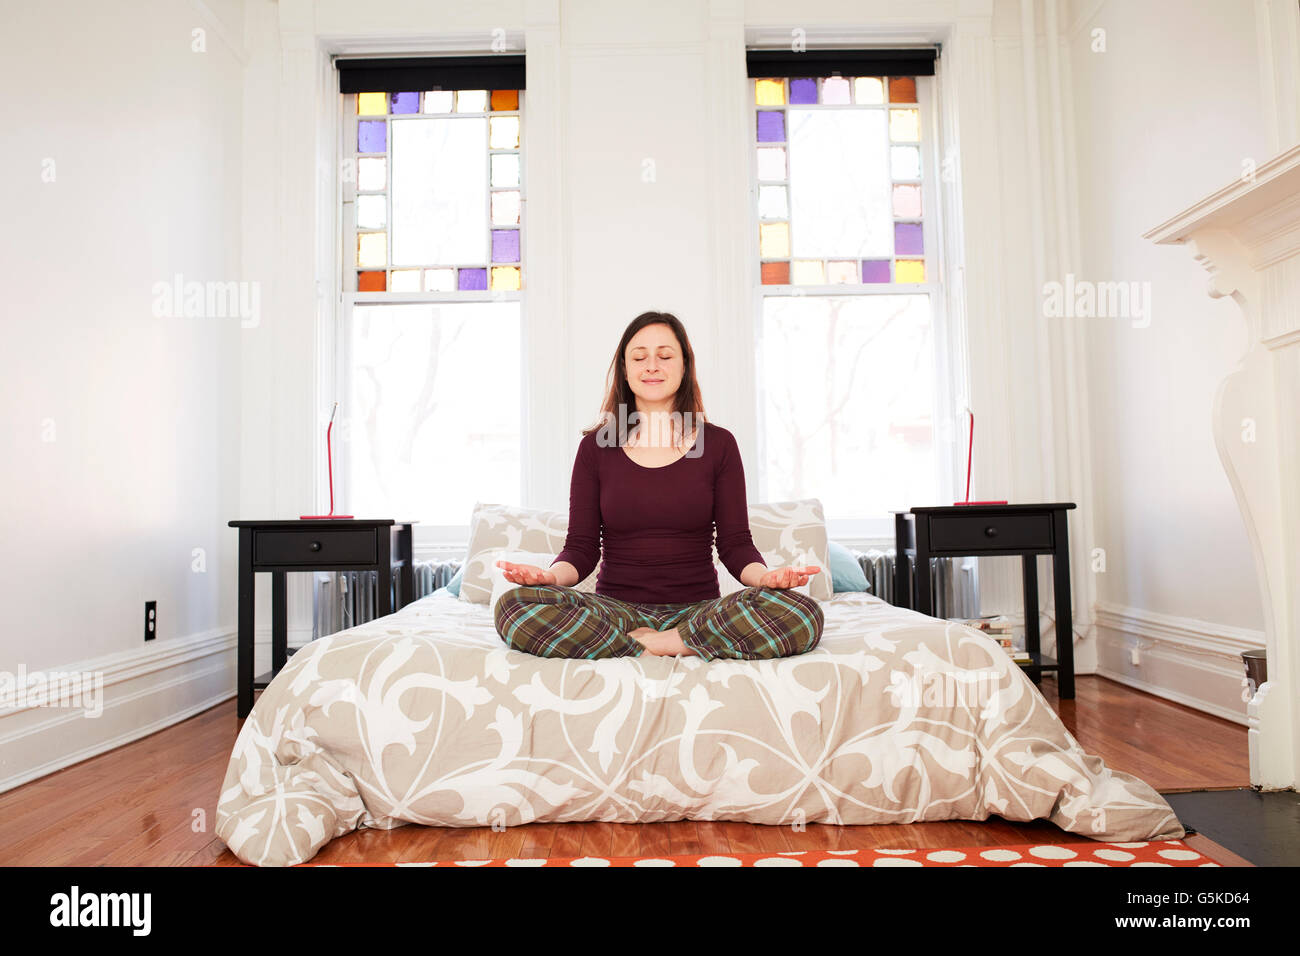 Mixed Race woman meditating in bedroom Banque D'Images